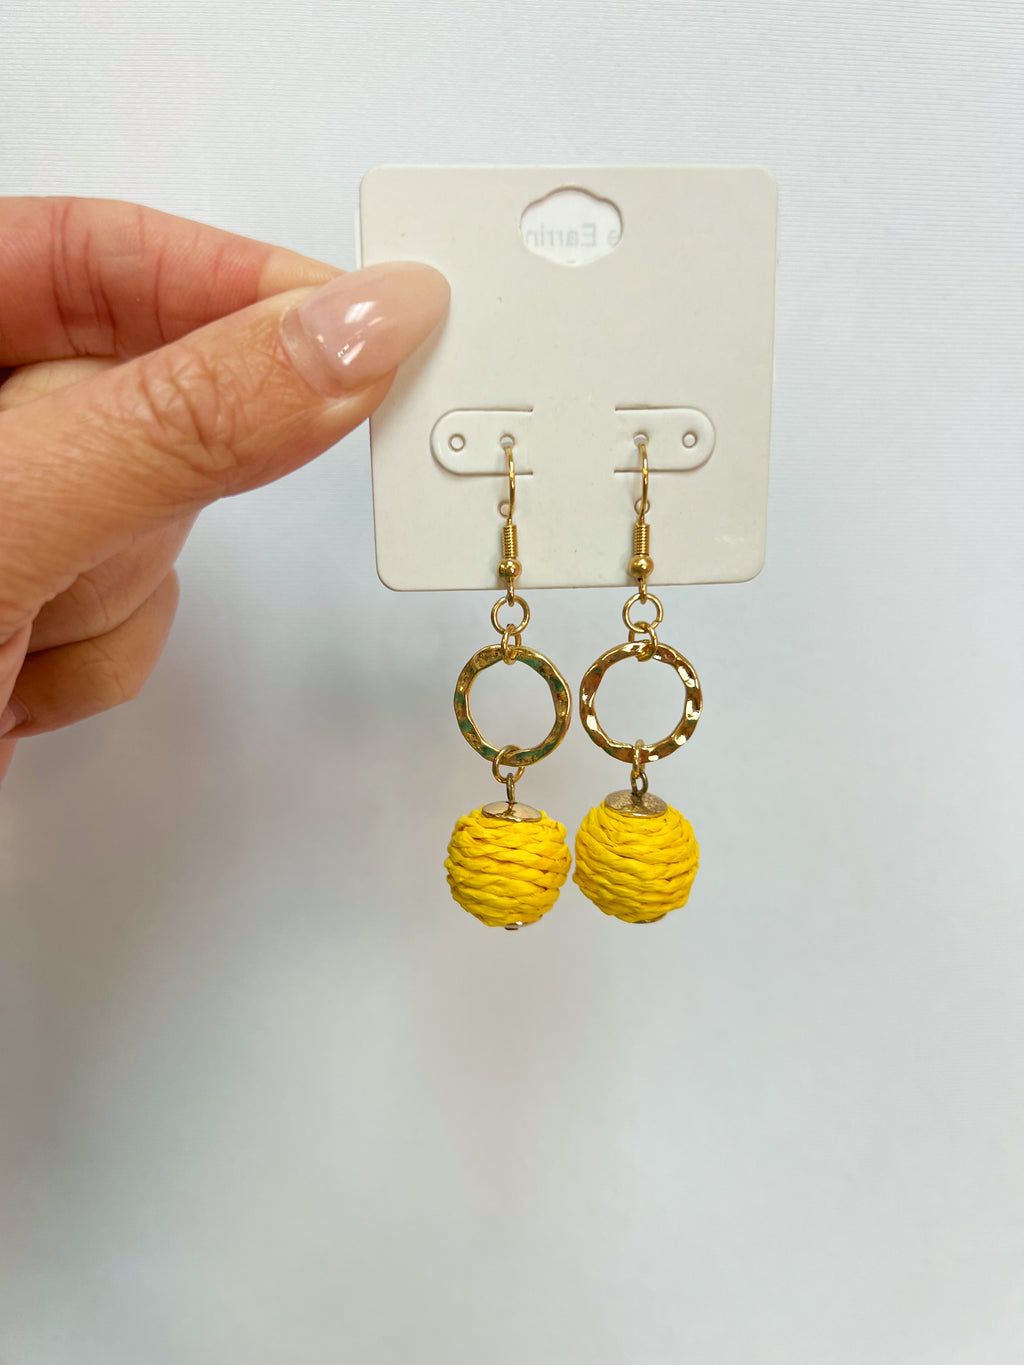 Party Time Earrings - Yellow-Earrings-The Lovely Closet-The Lovely Closet, Women's Fashion Boutique in Alexandria, KY